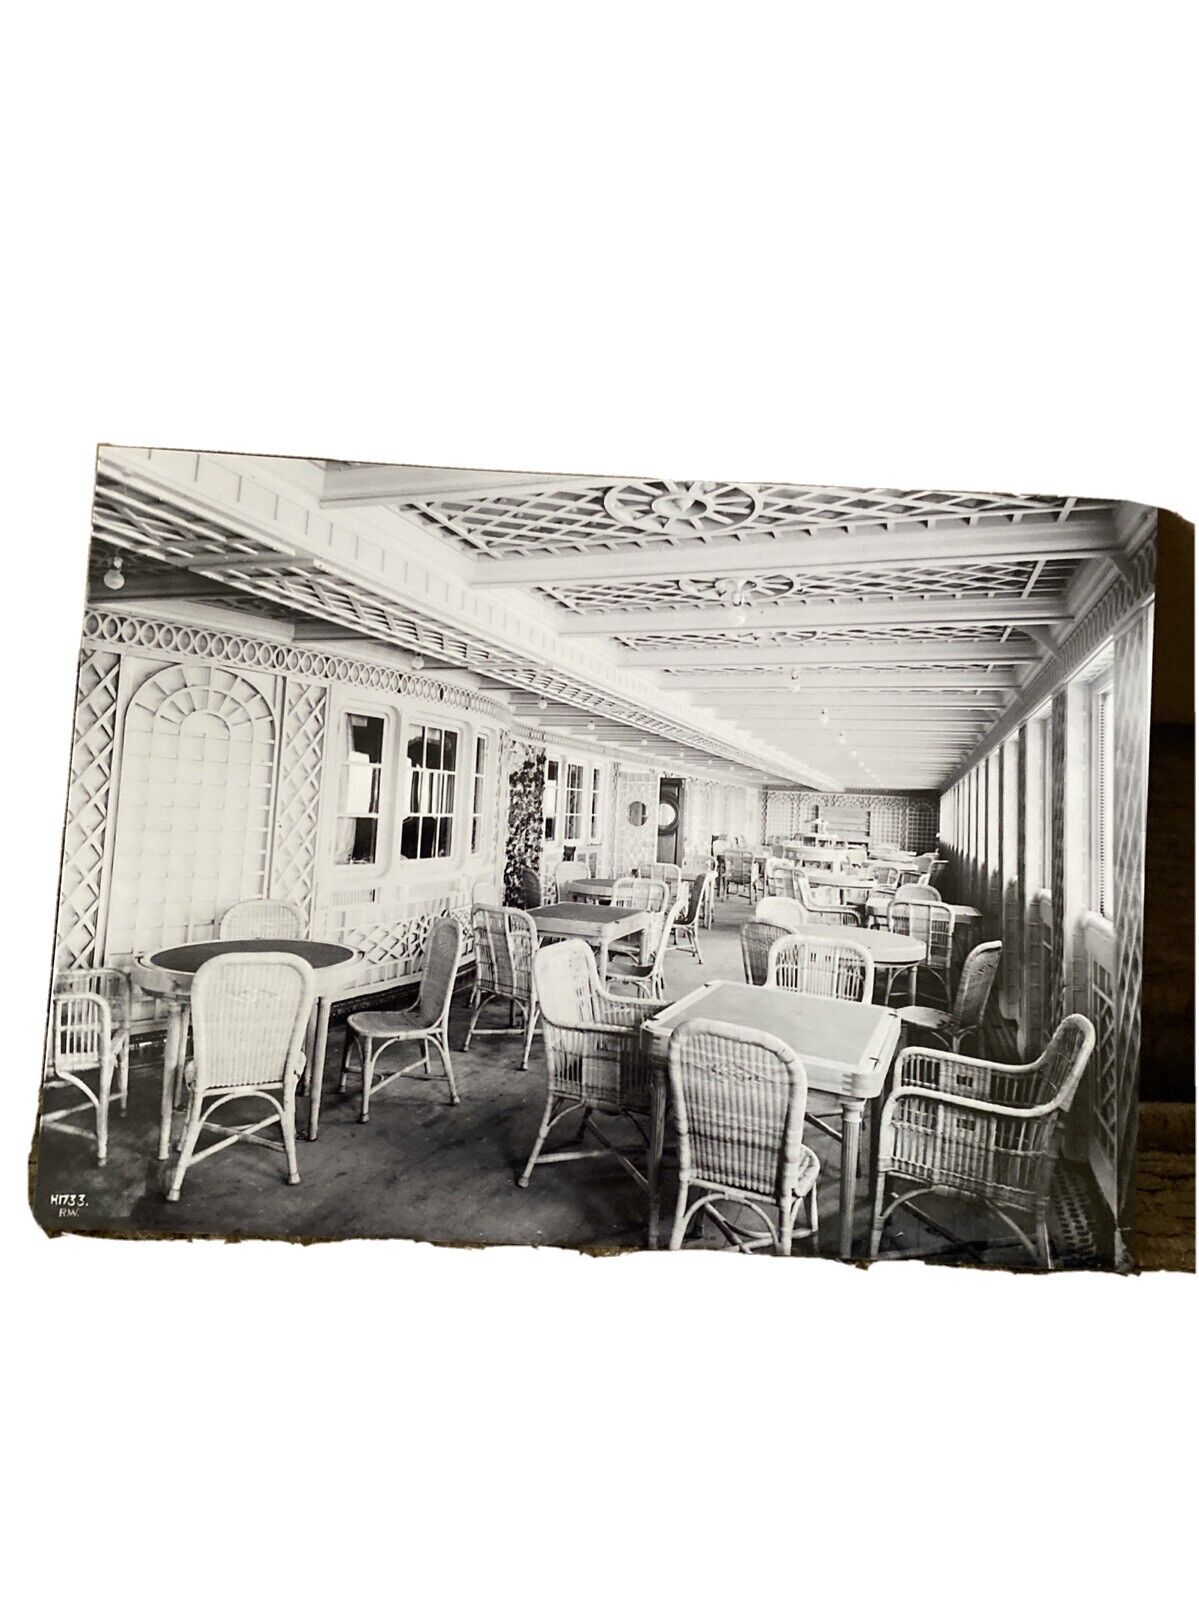 Titanic Cafe PHOTO 1st Class Dining, Cafe Parisien Dining Room Restaurant Luxury